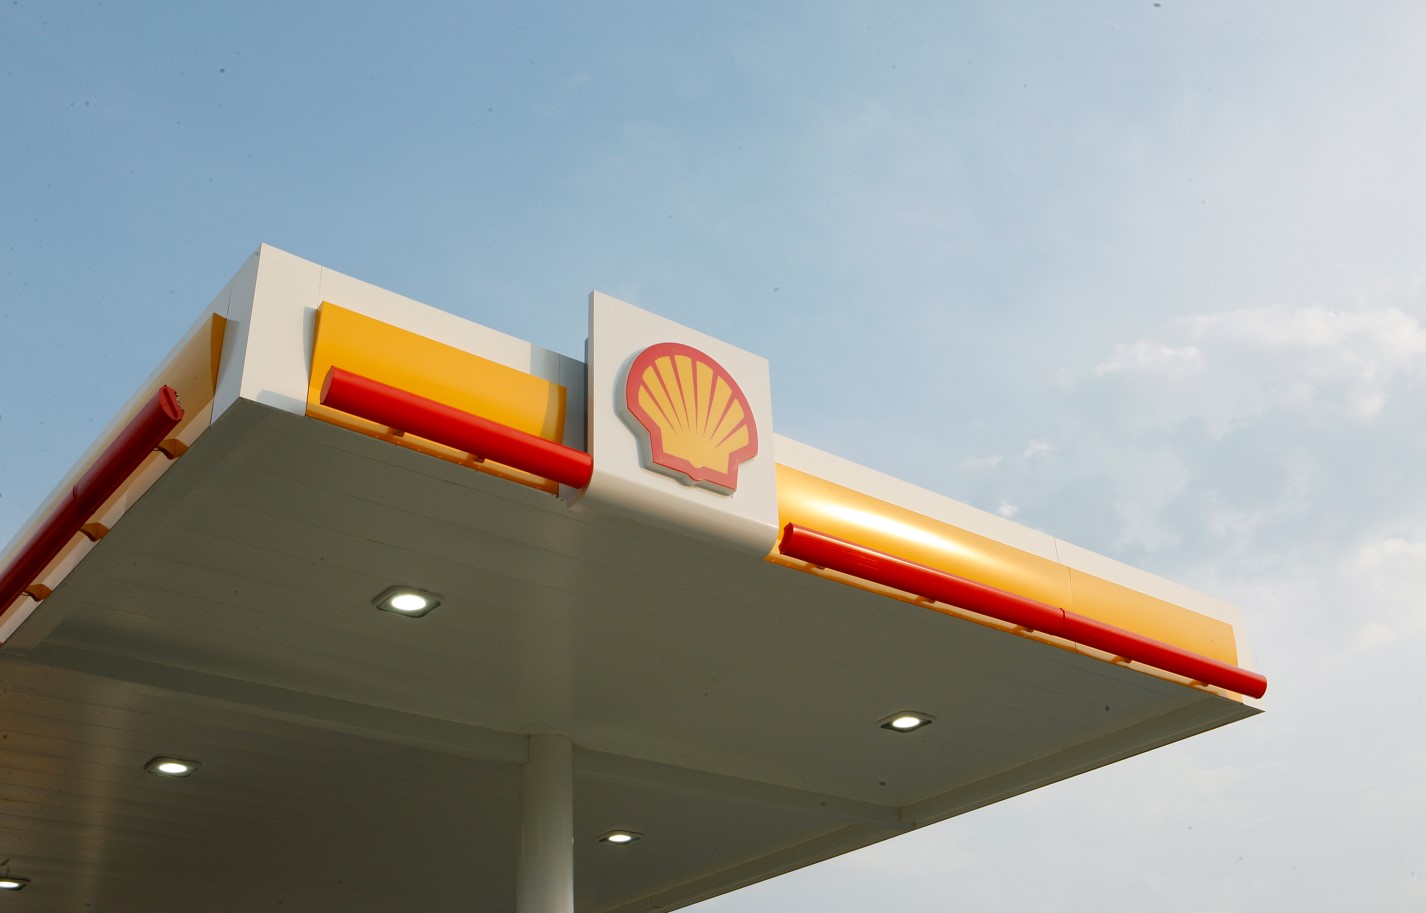 Shell expects higher liquefaction volumes in Q1